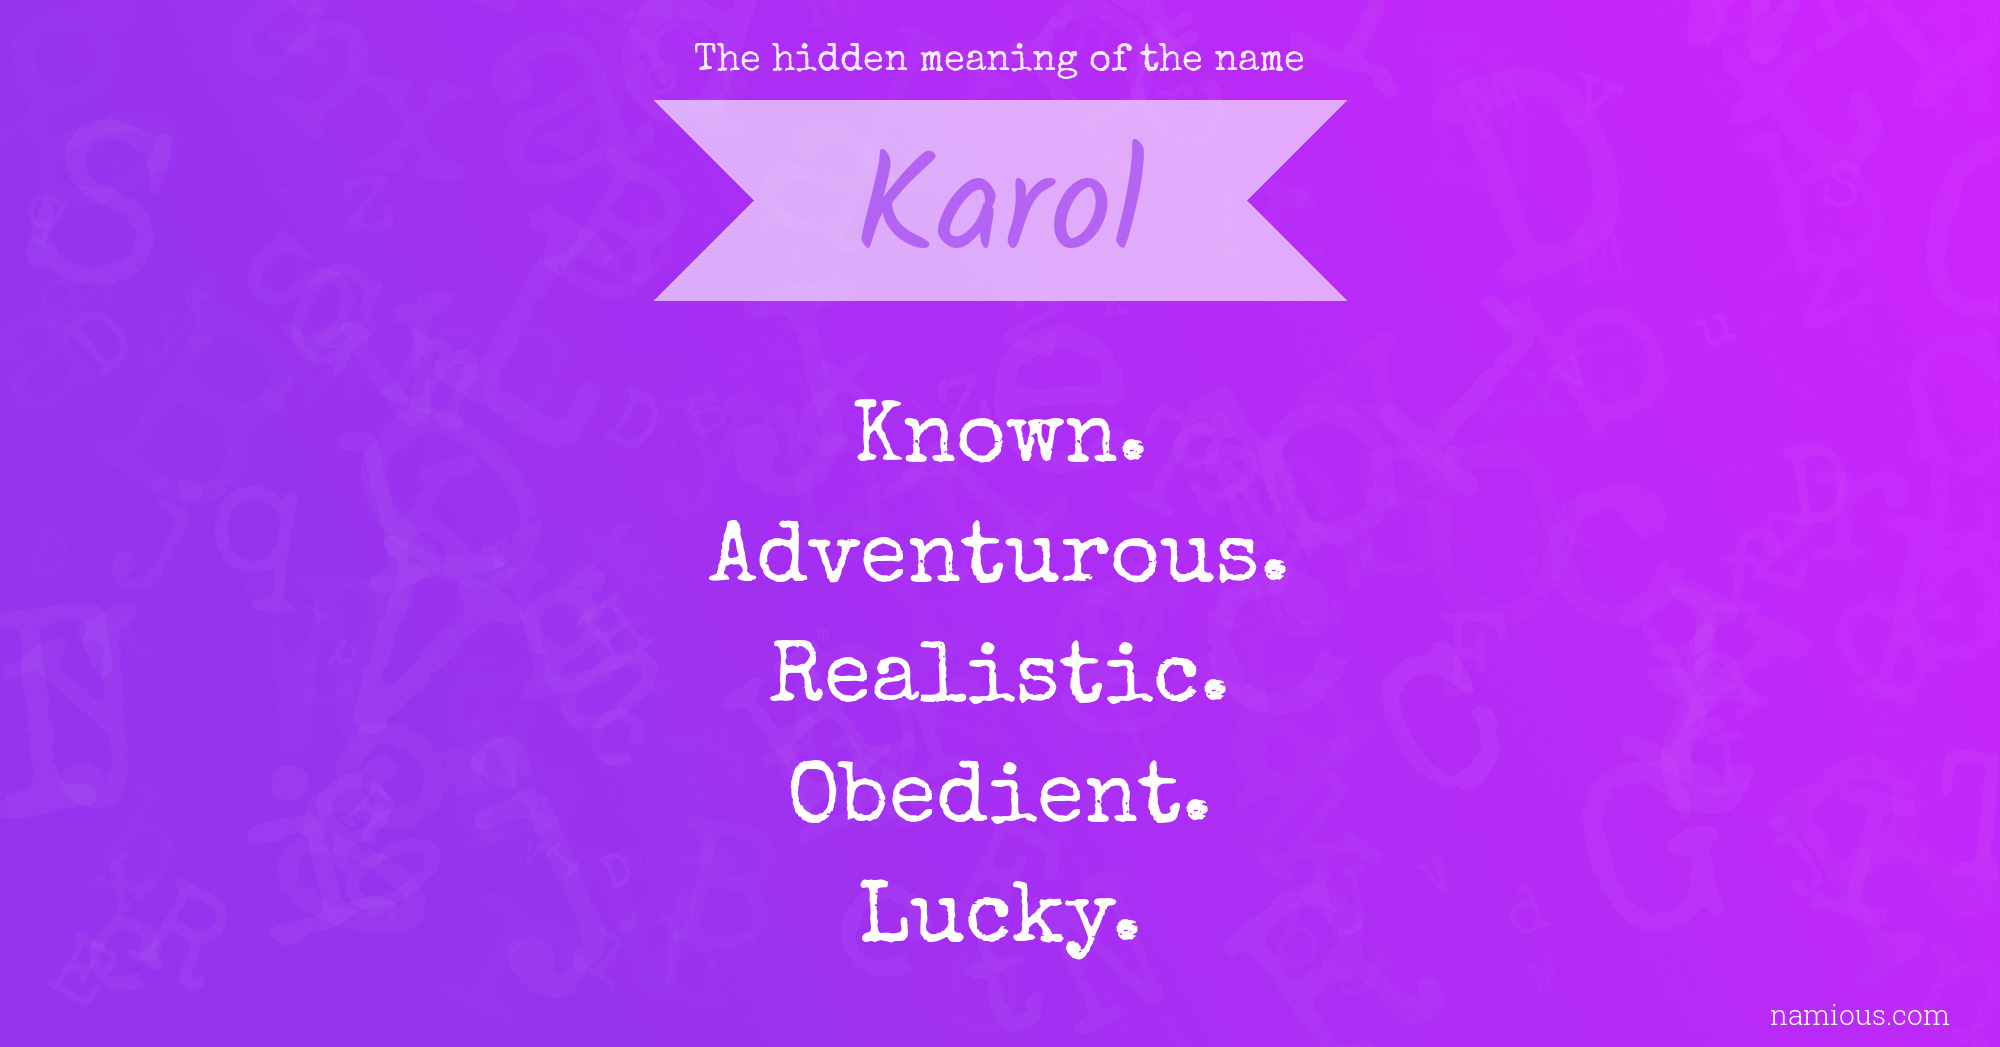 The hidden meaning of the name Karol